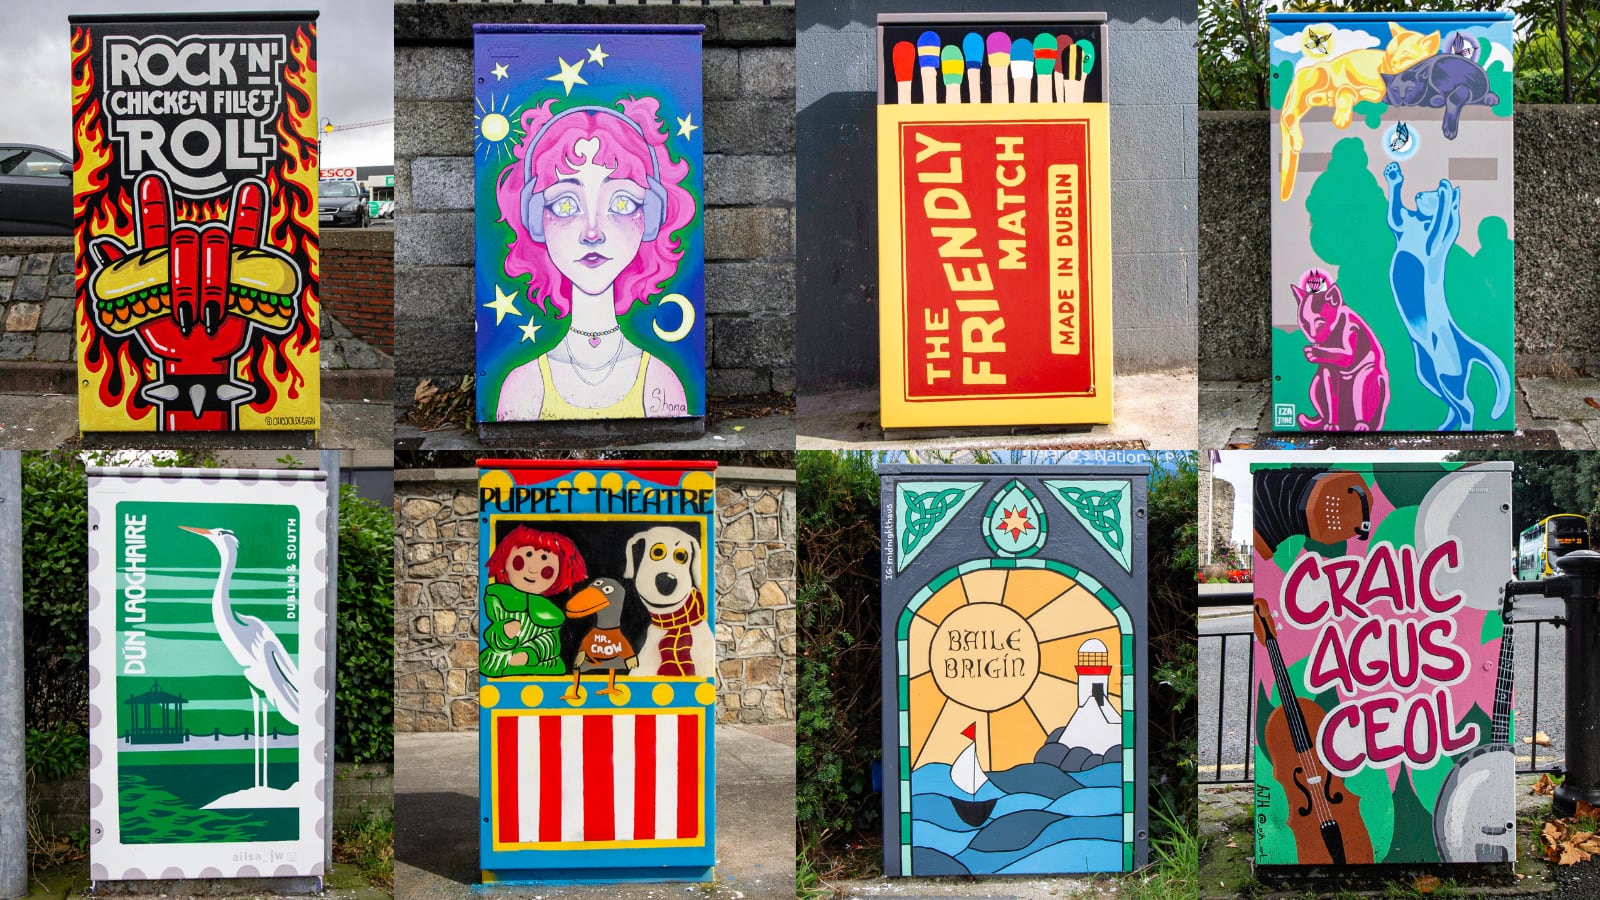 Across the capital, 500 traffic signal boxes have been transformed into pieces of public art